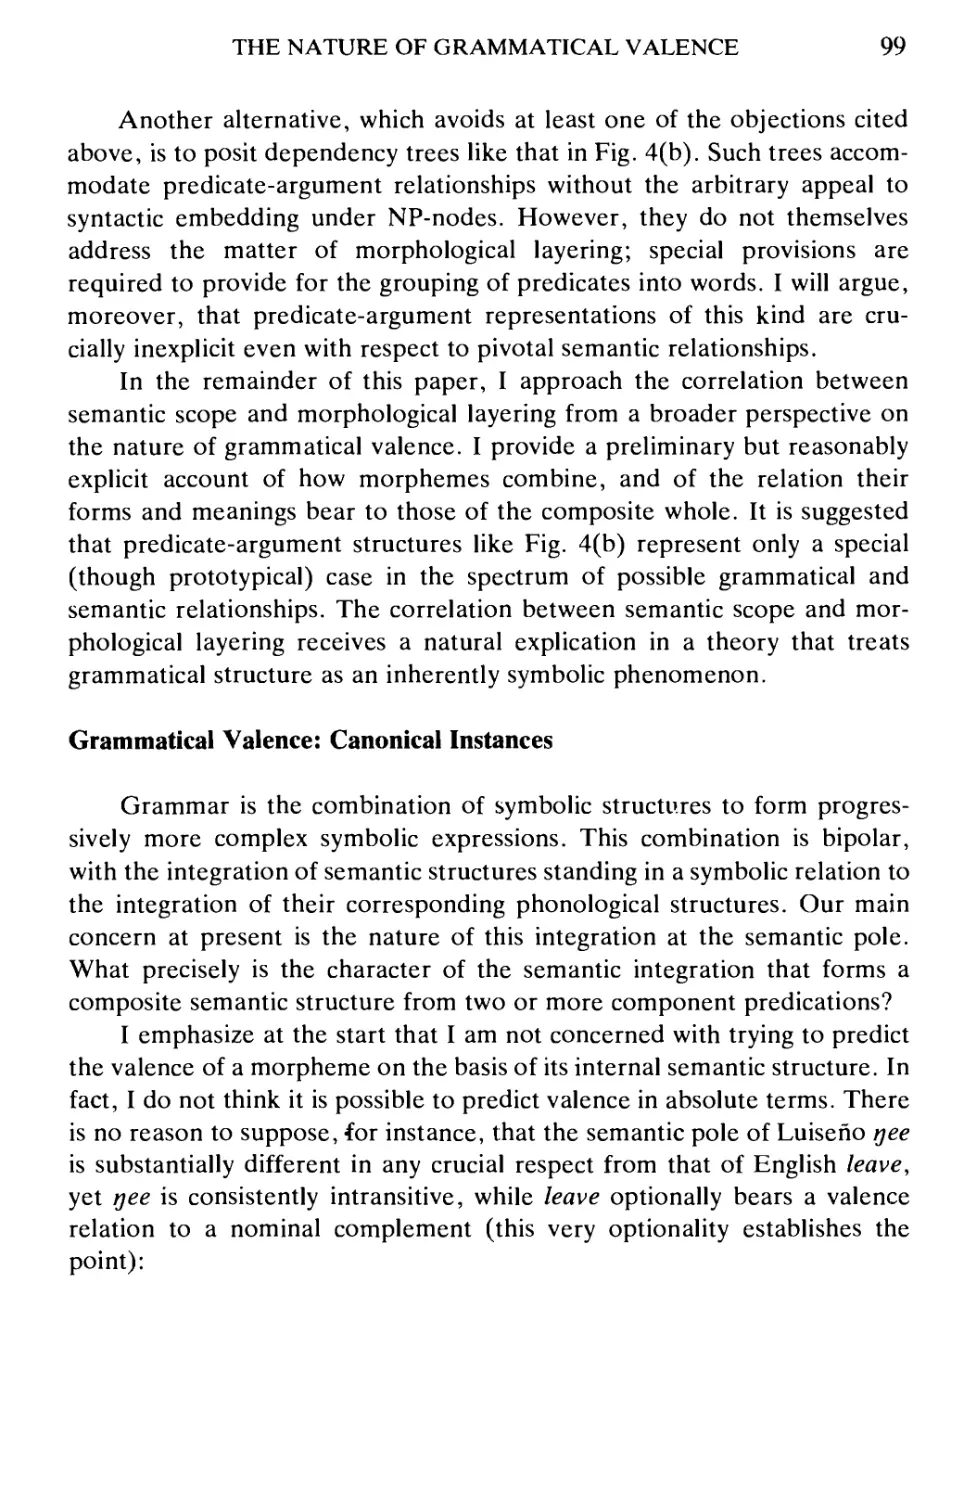 Grammatical Valence: Canonical Instances